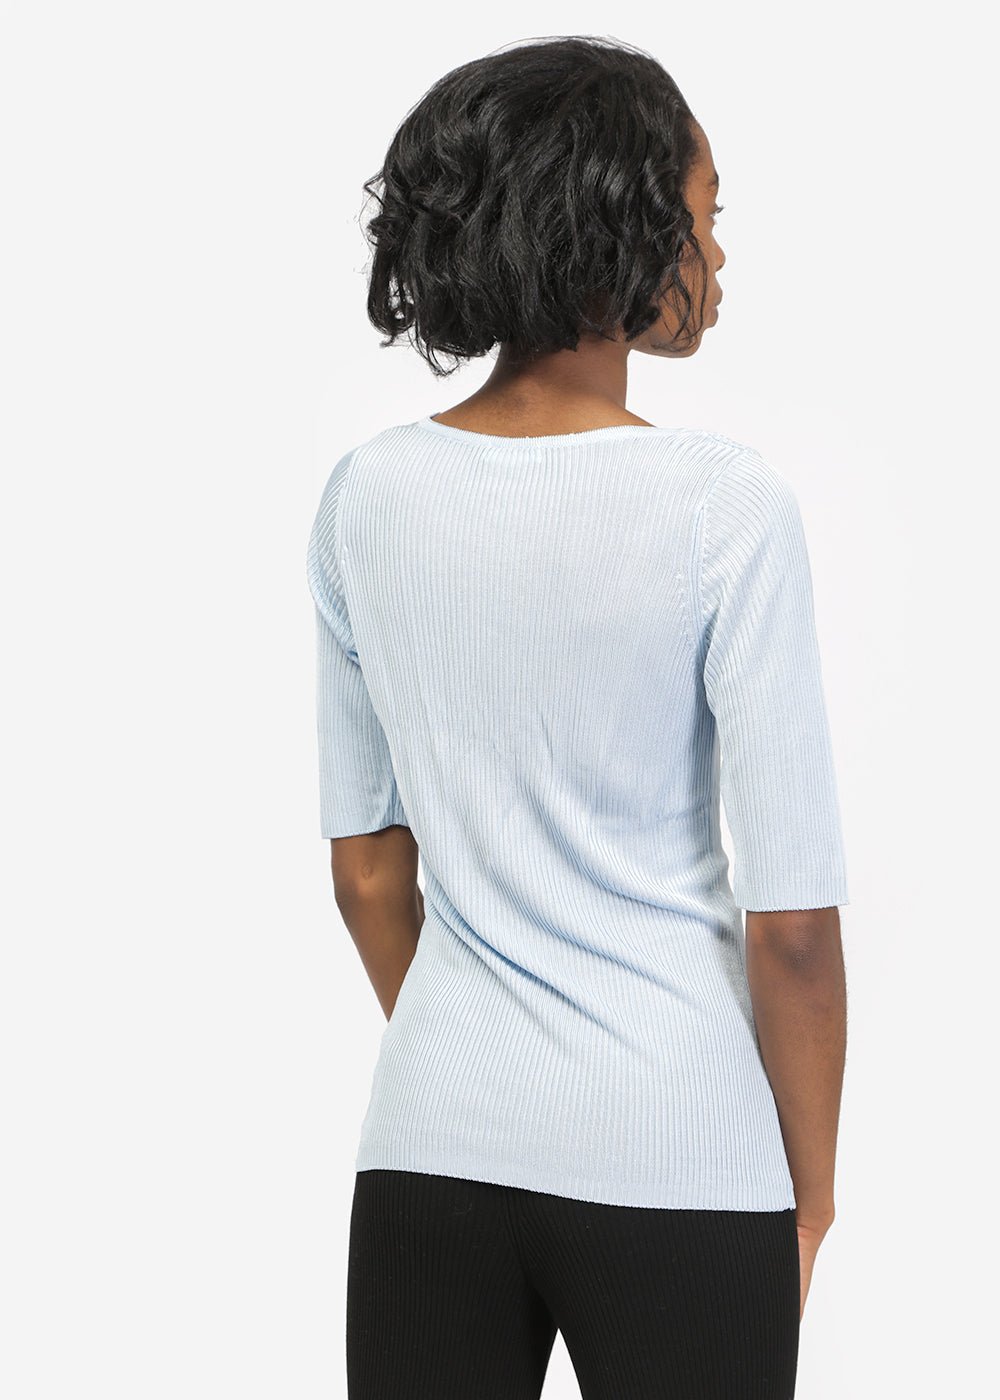 Suzanne Rae Short Sleeve Scoop Neck Knit - New Classics Studios Sustainable Ethical Fashion Canada